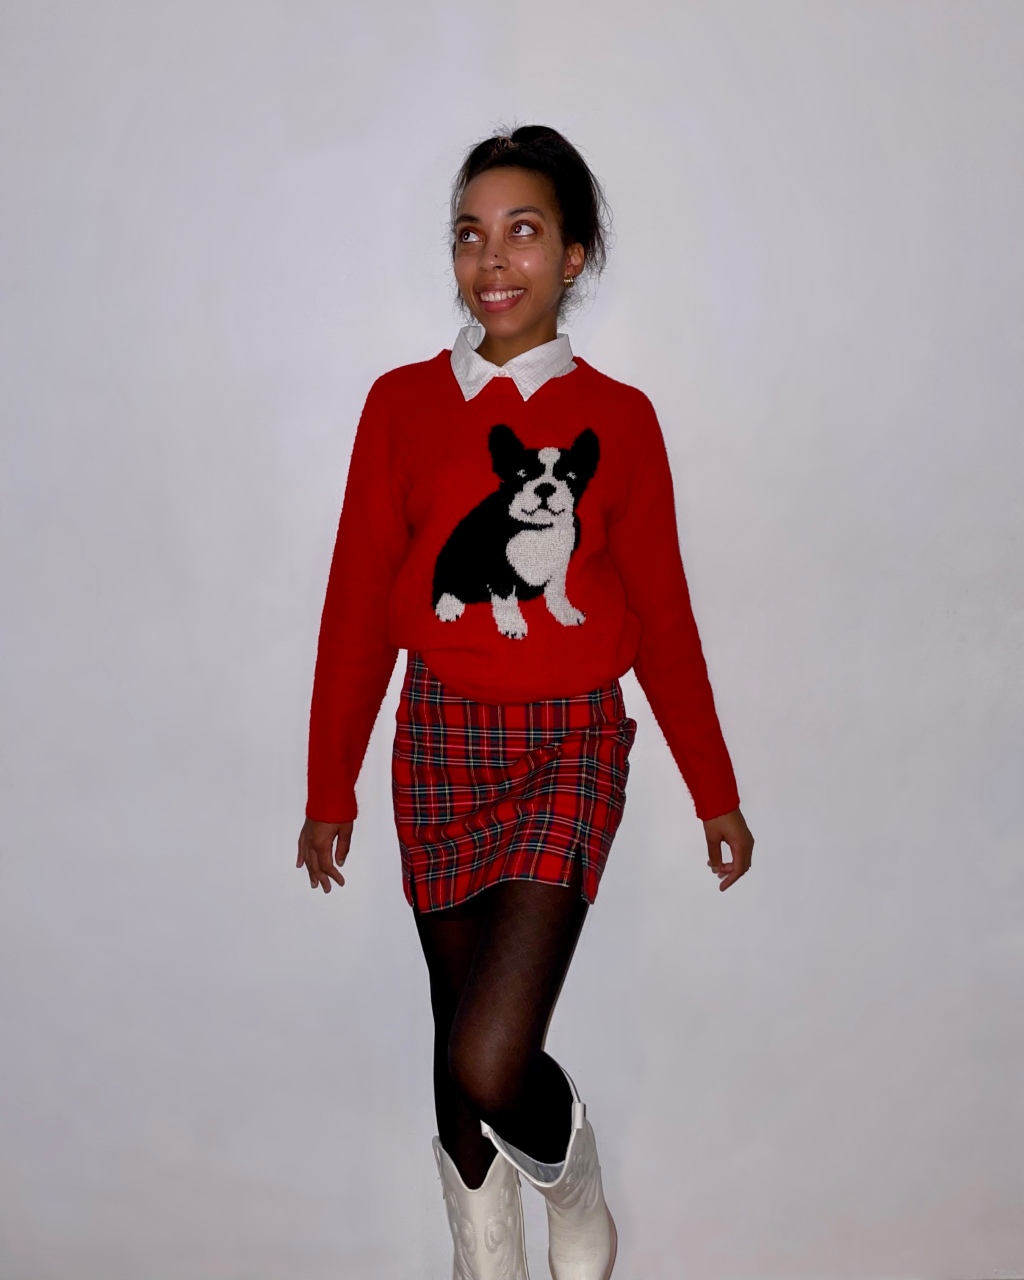 My Christmas Inspired Outfit